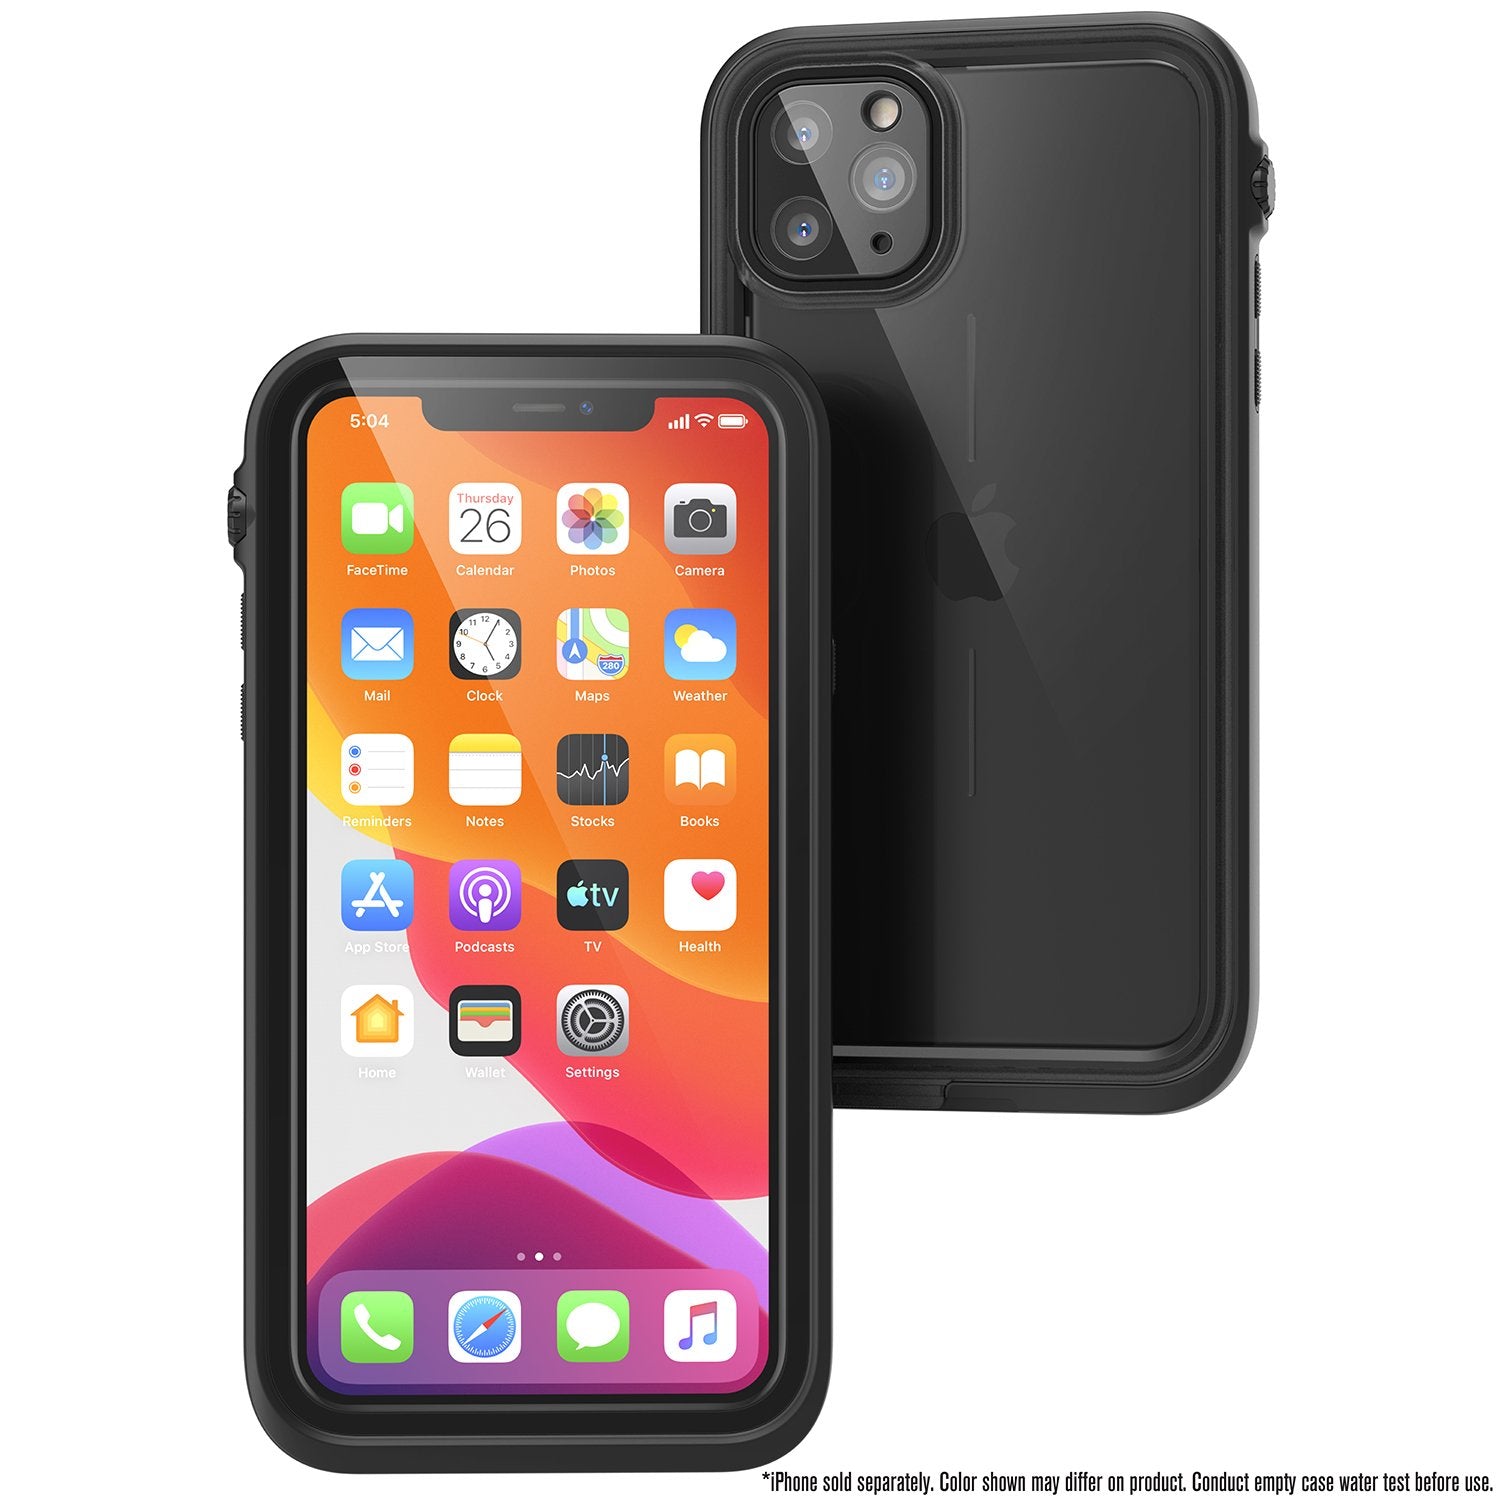 Catalyst iphone 11 pro max waterproof case showing the front and back view of the case in stealth black colorway